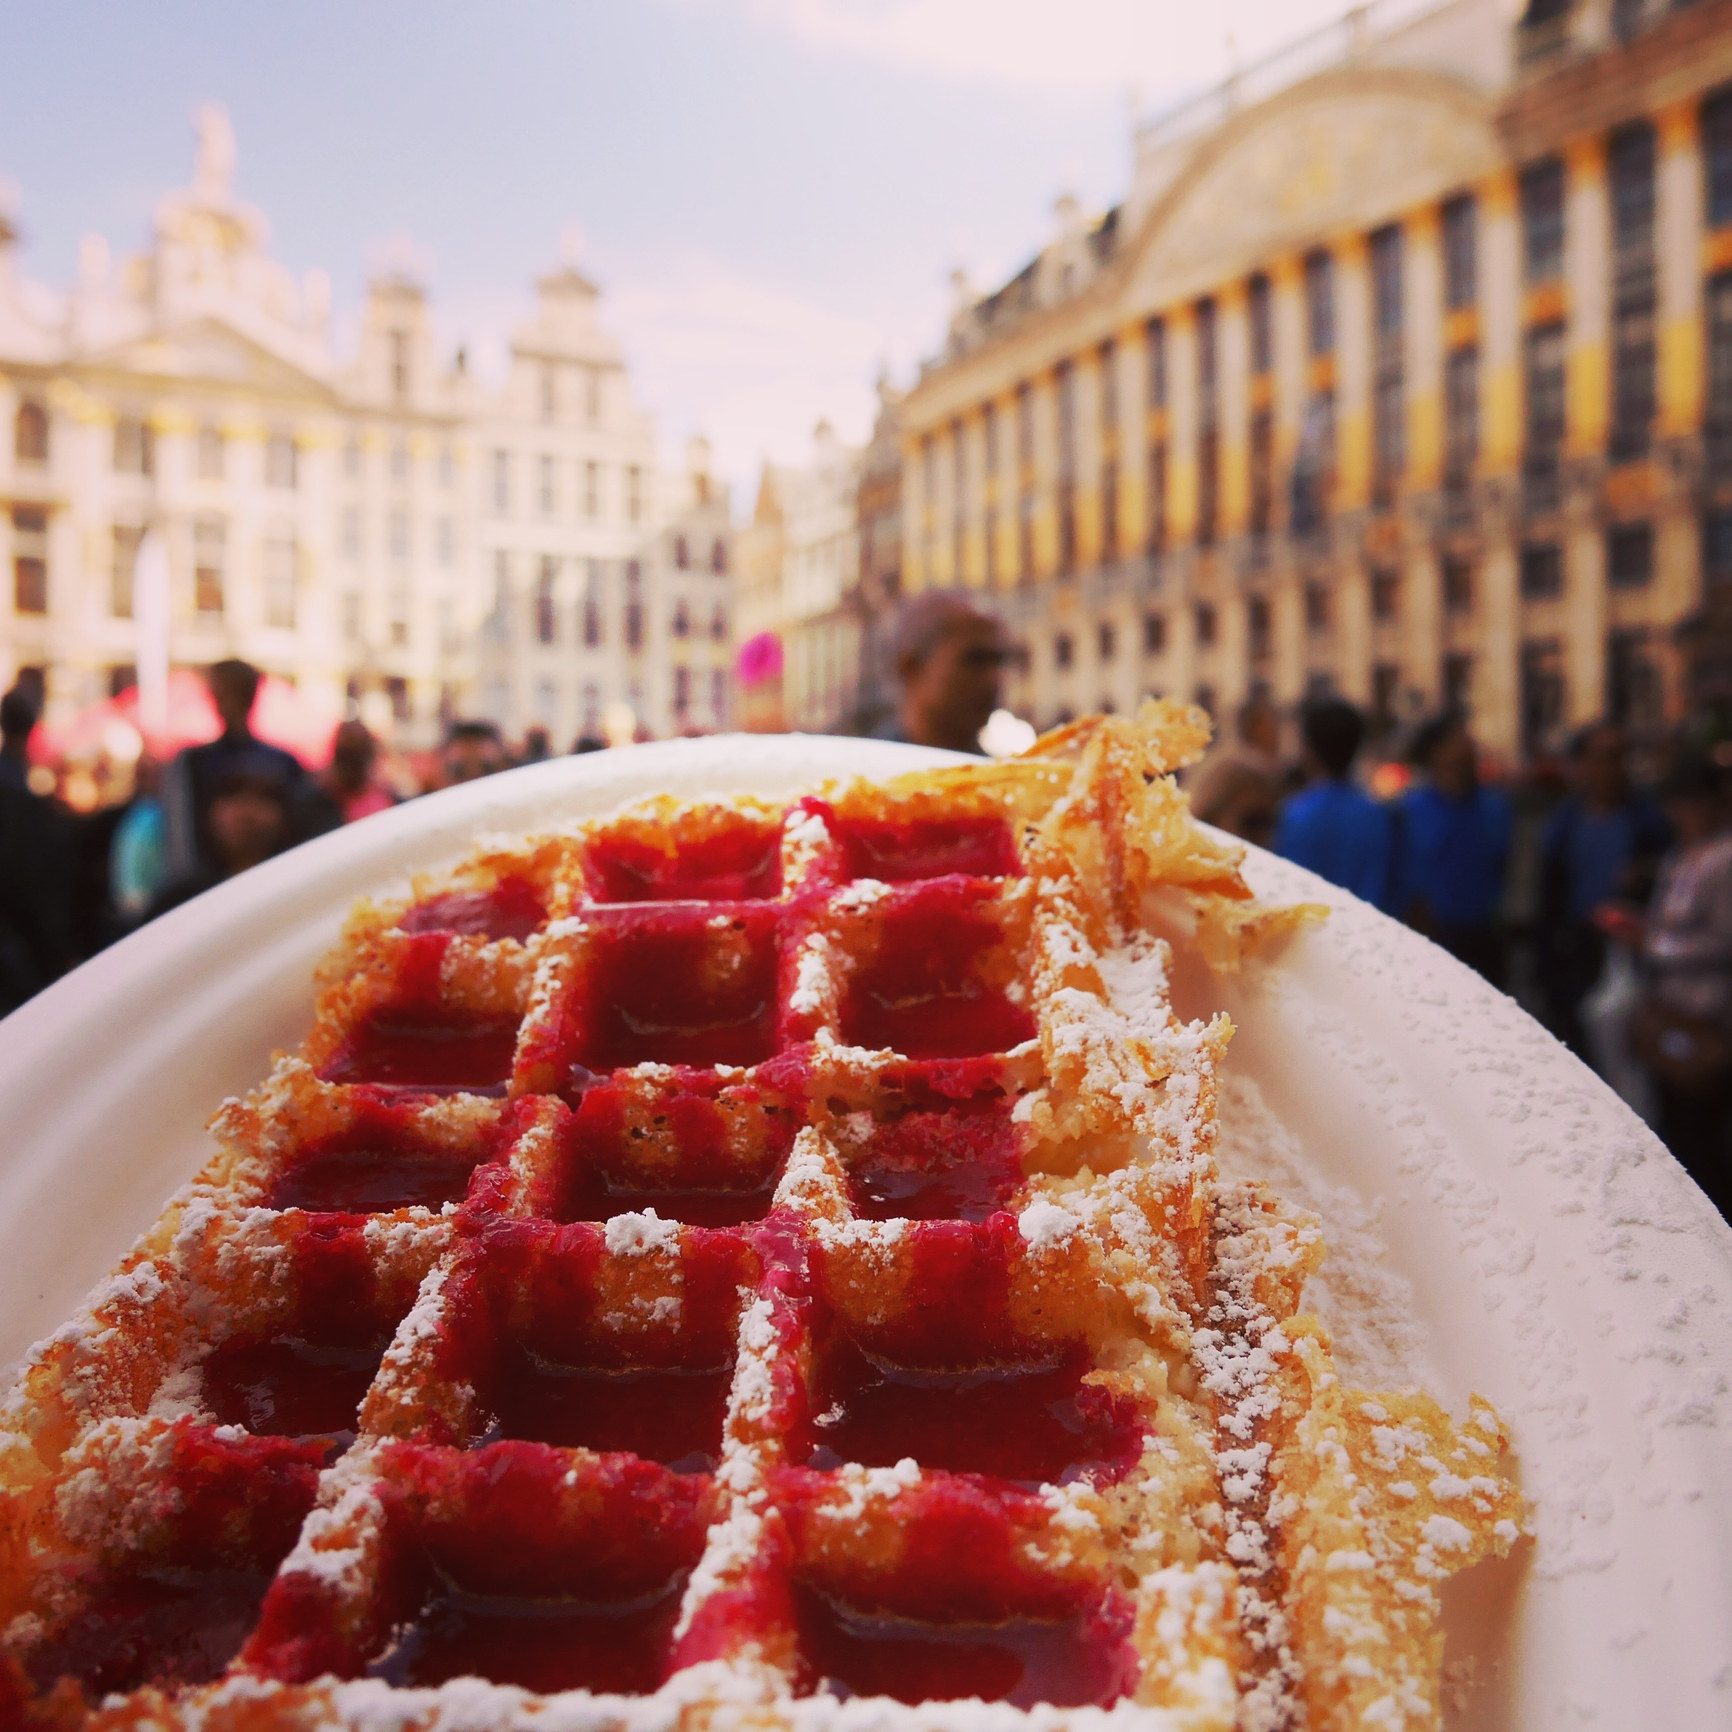 A close-up of a waffle with a city view in the backdrop